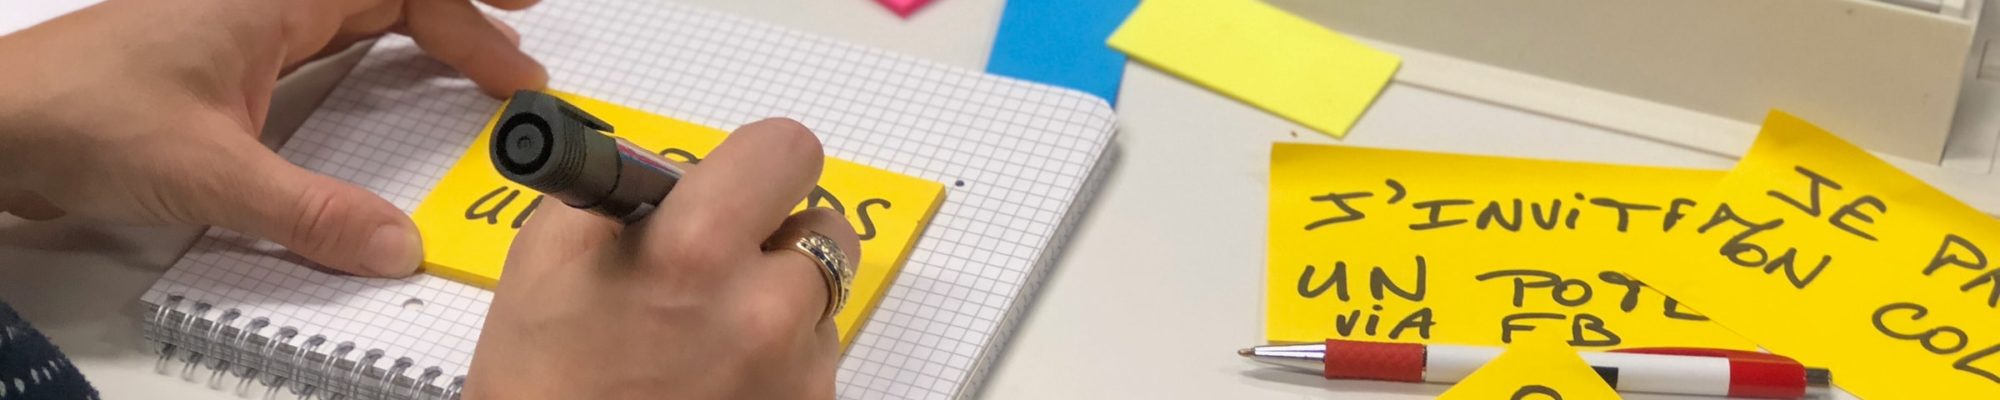 person writing on a sticky note using a marker